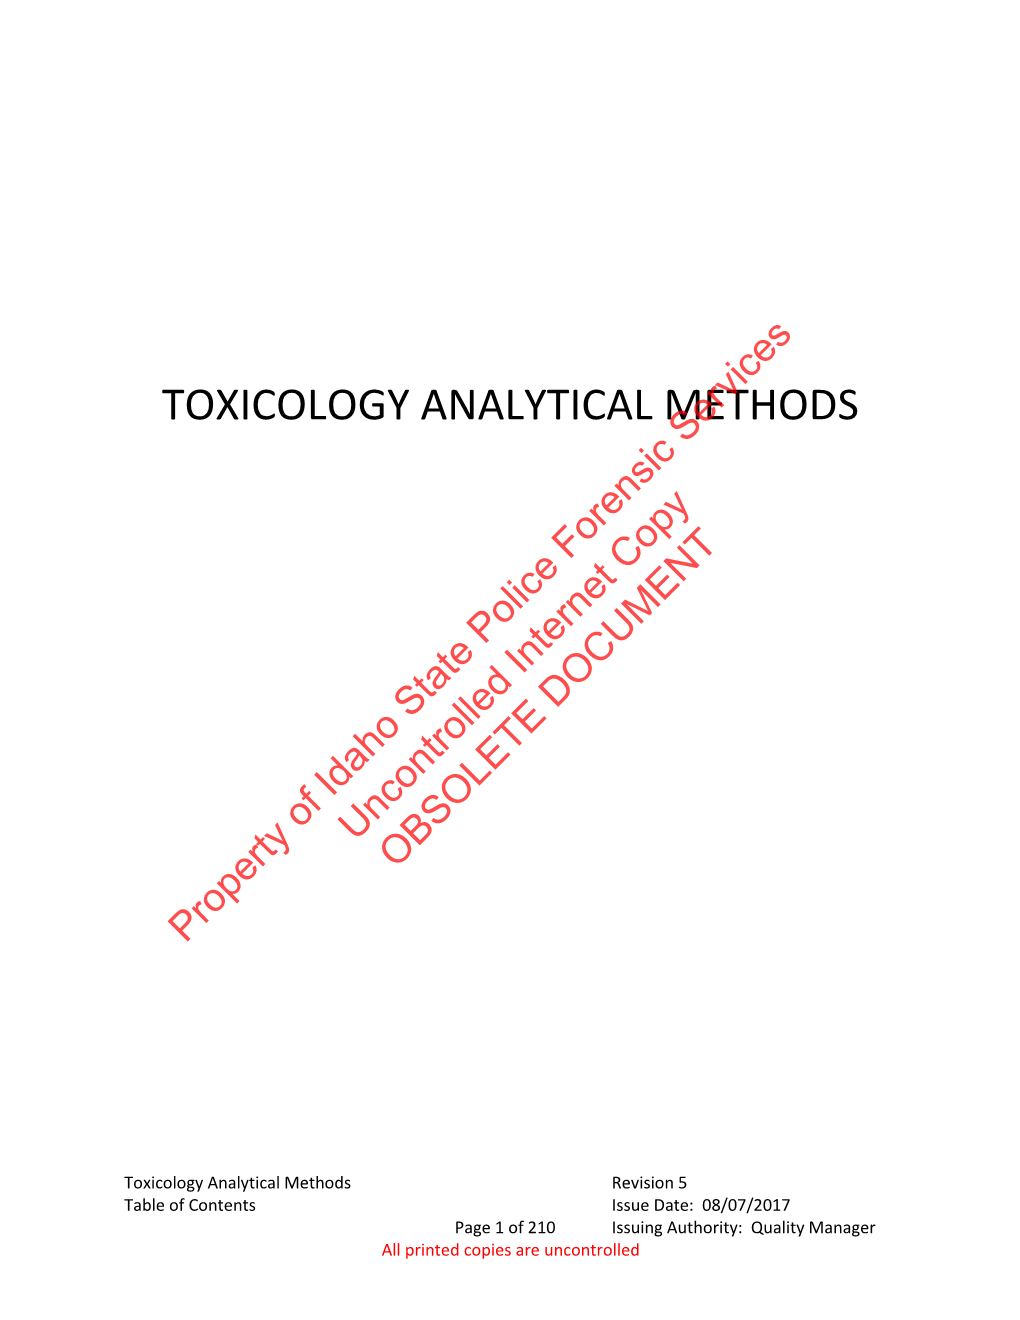 TOXICOLOGY ANALYTICAL METHODS Services